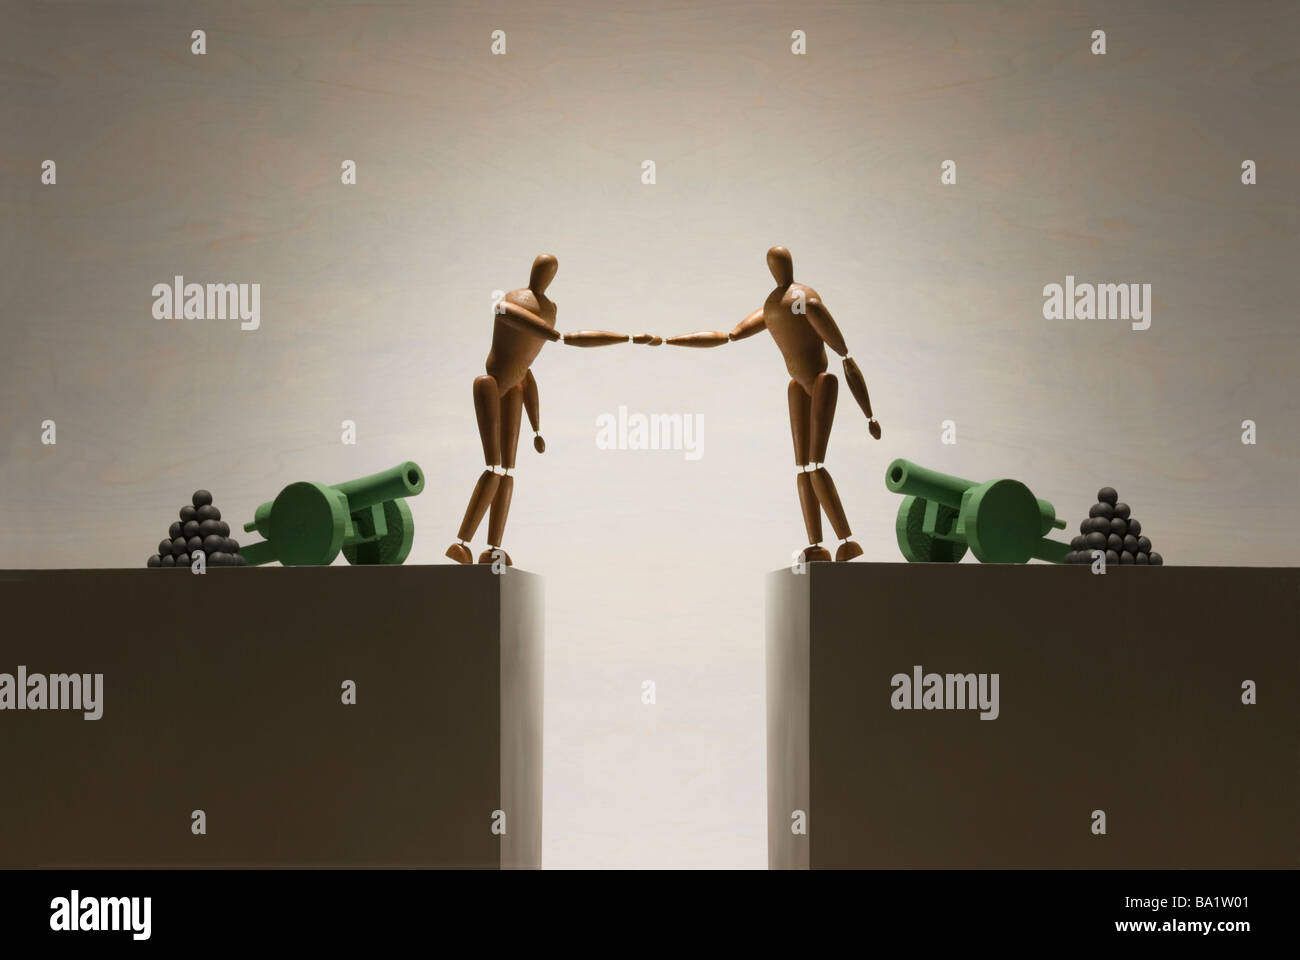 Two figures shake hands accross a gap Each figure has a cannon in the background Stock Photo